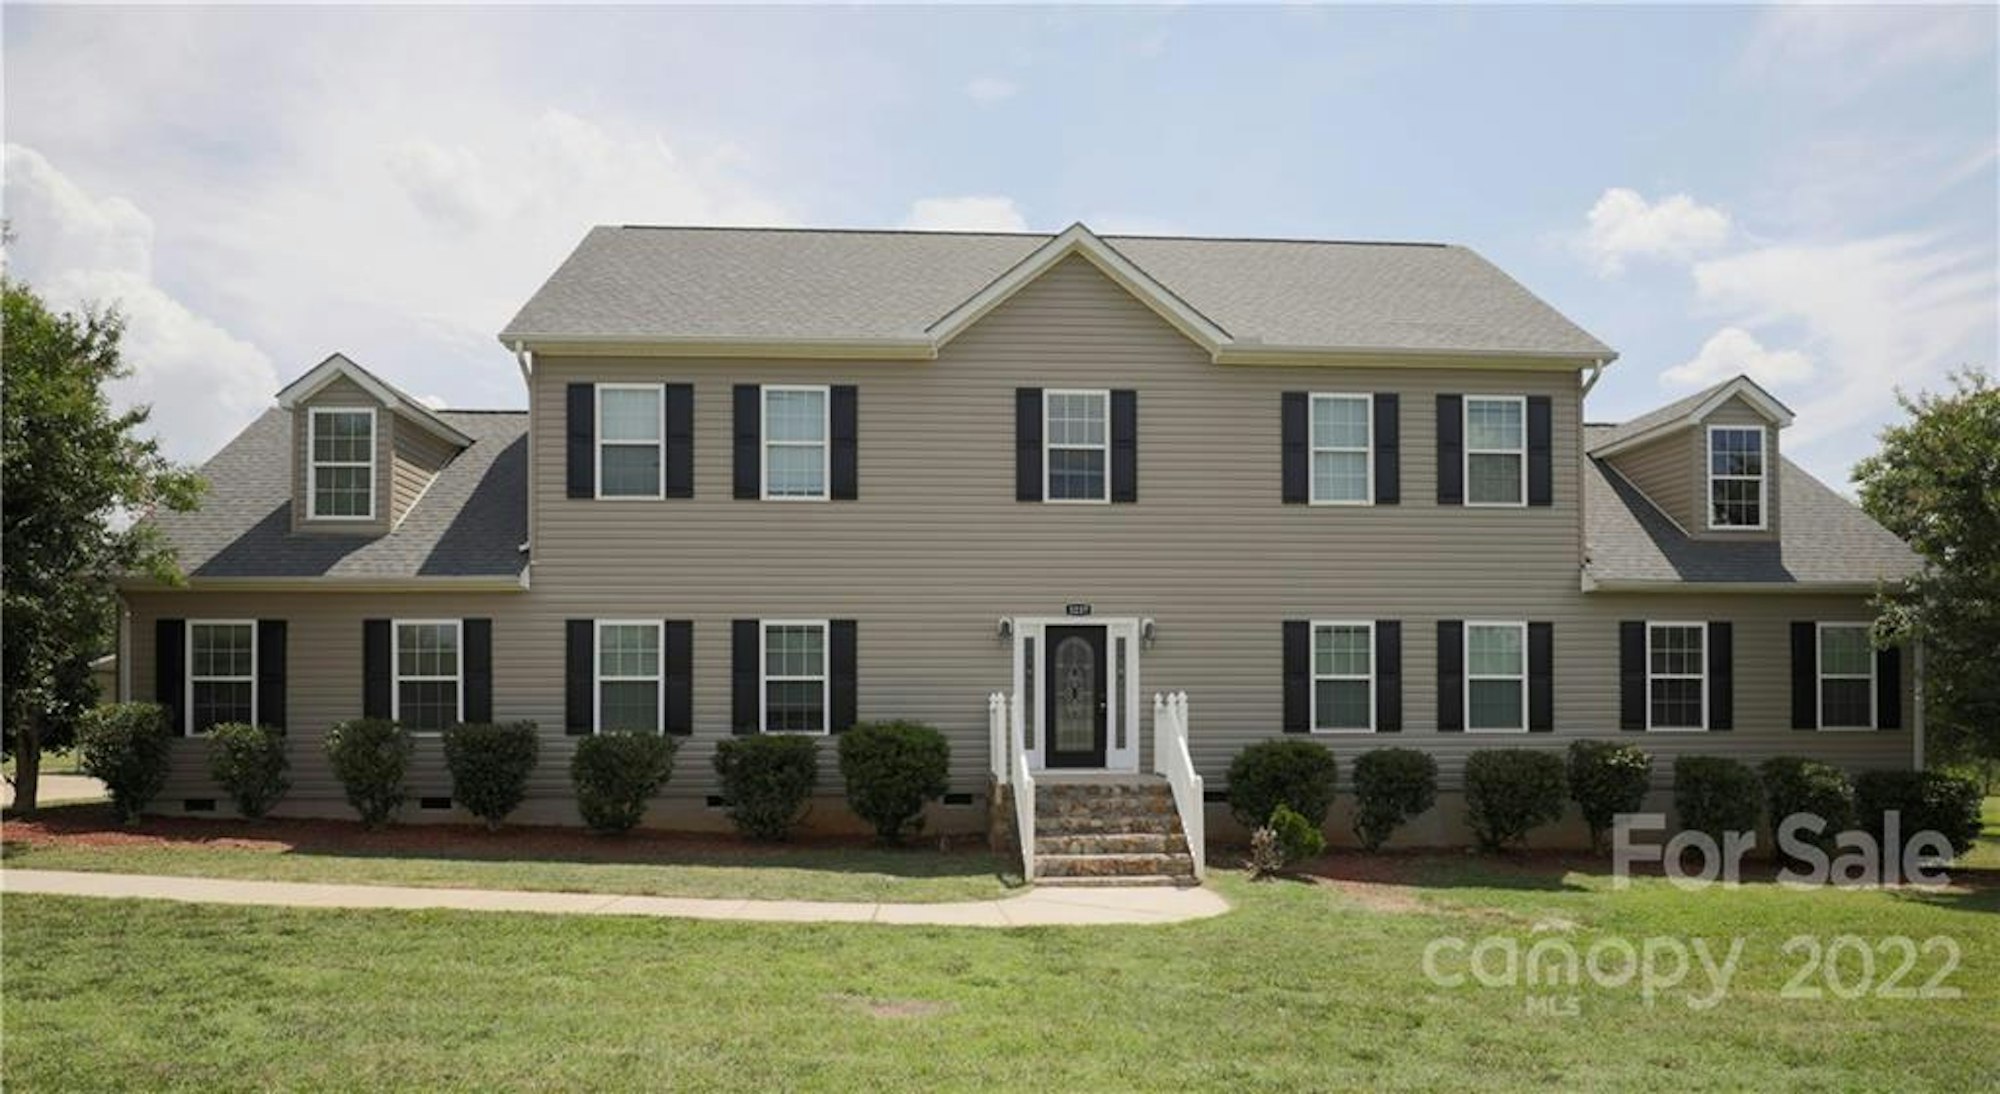 Photo 1 of 24 - 3237 Evondale Rd, Crouse, NC 28033